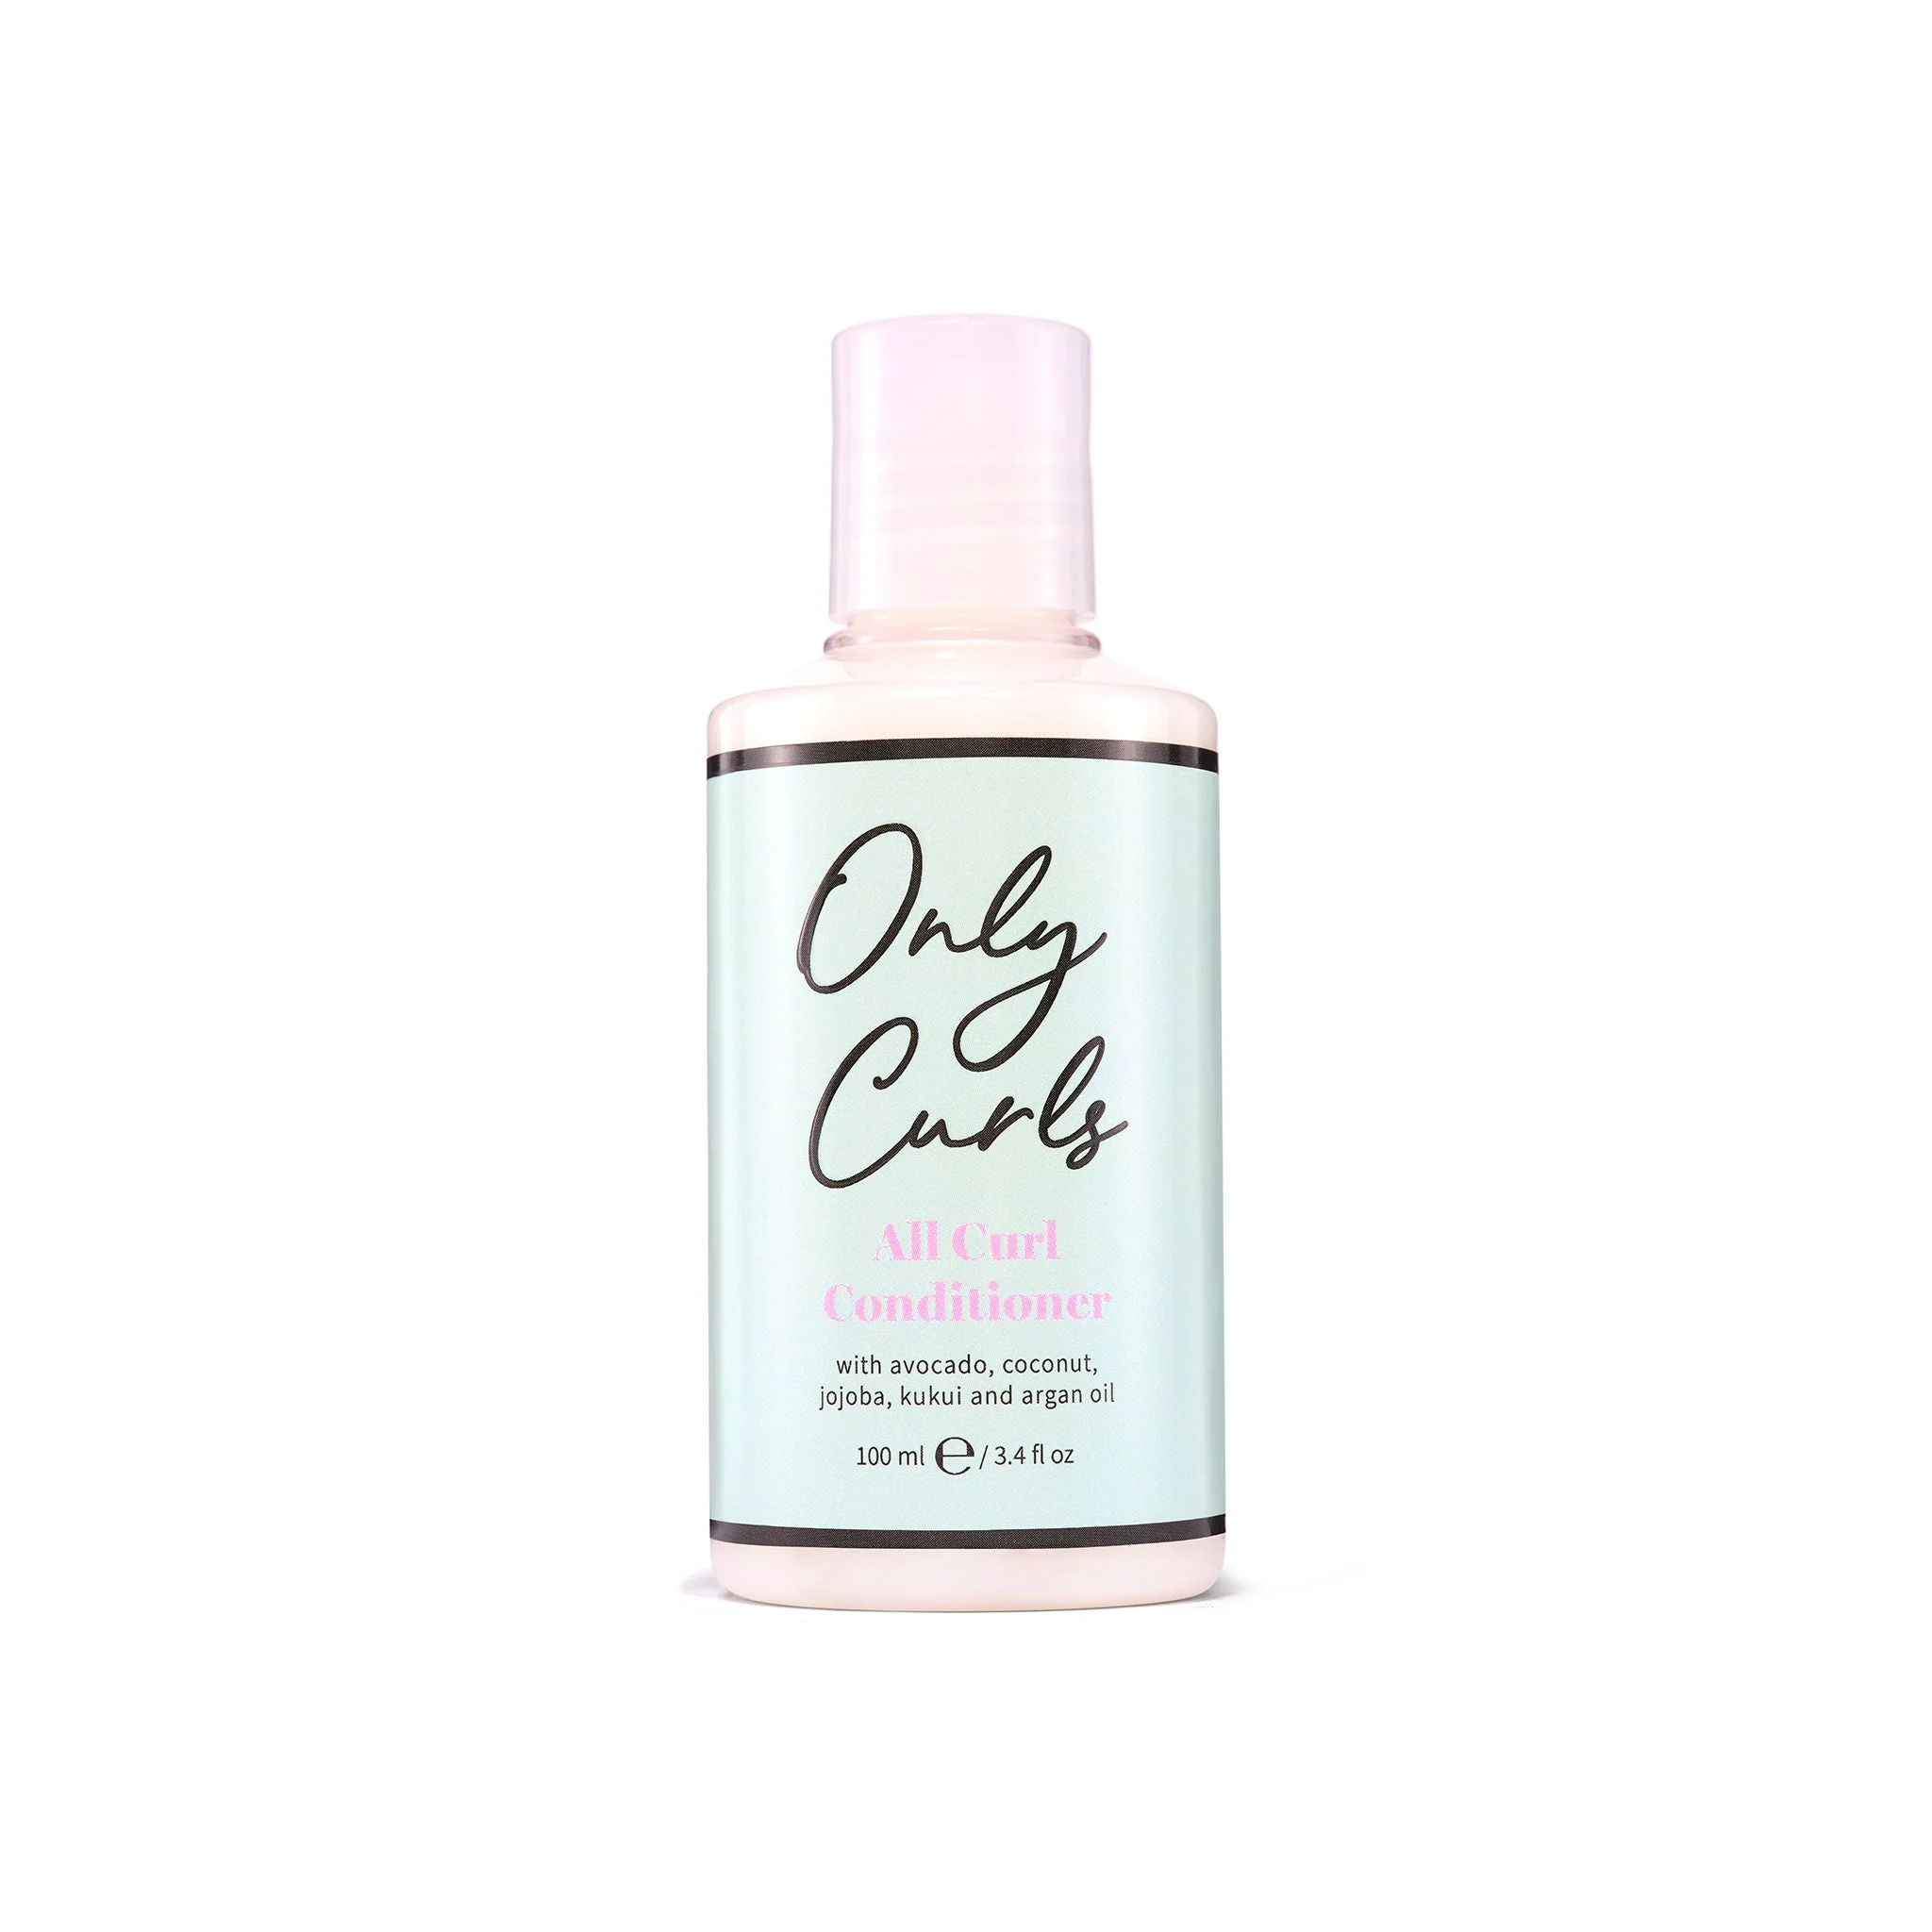 Only Curls All Curl Conditioner - Travel Size